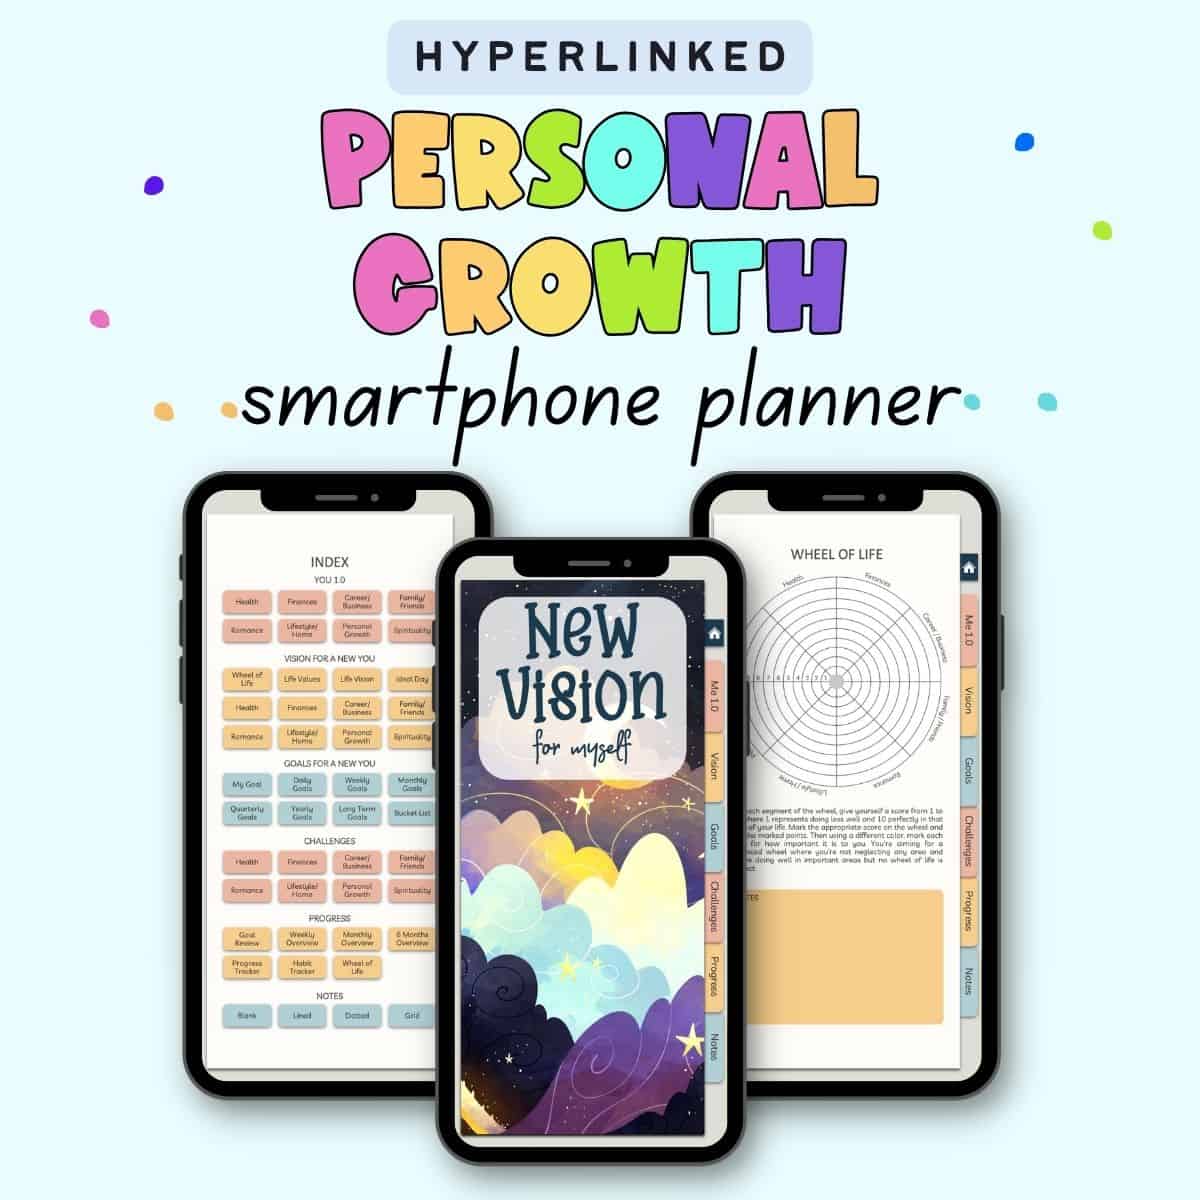 Text "hyperlinked personal growth smartphone planner" with a preview of there pages from a personal growth digital planner